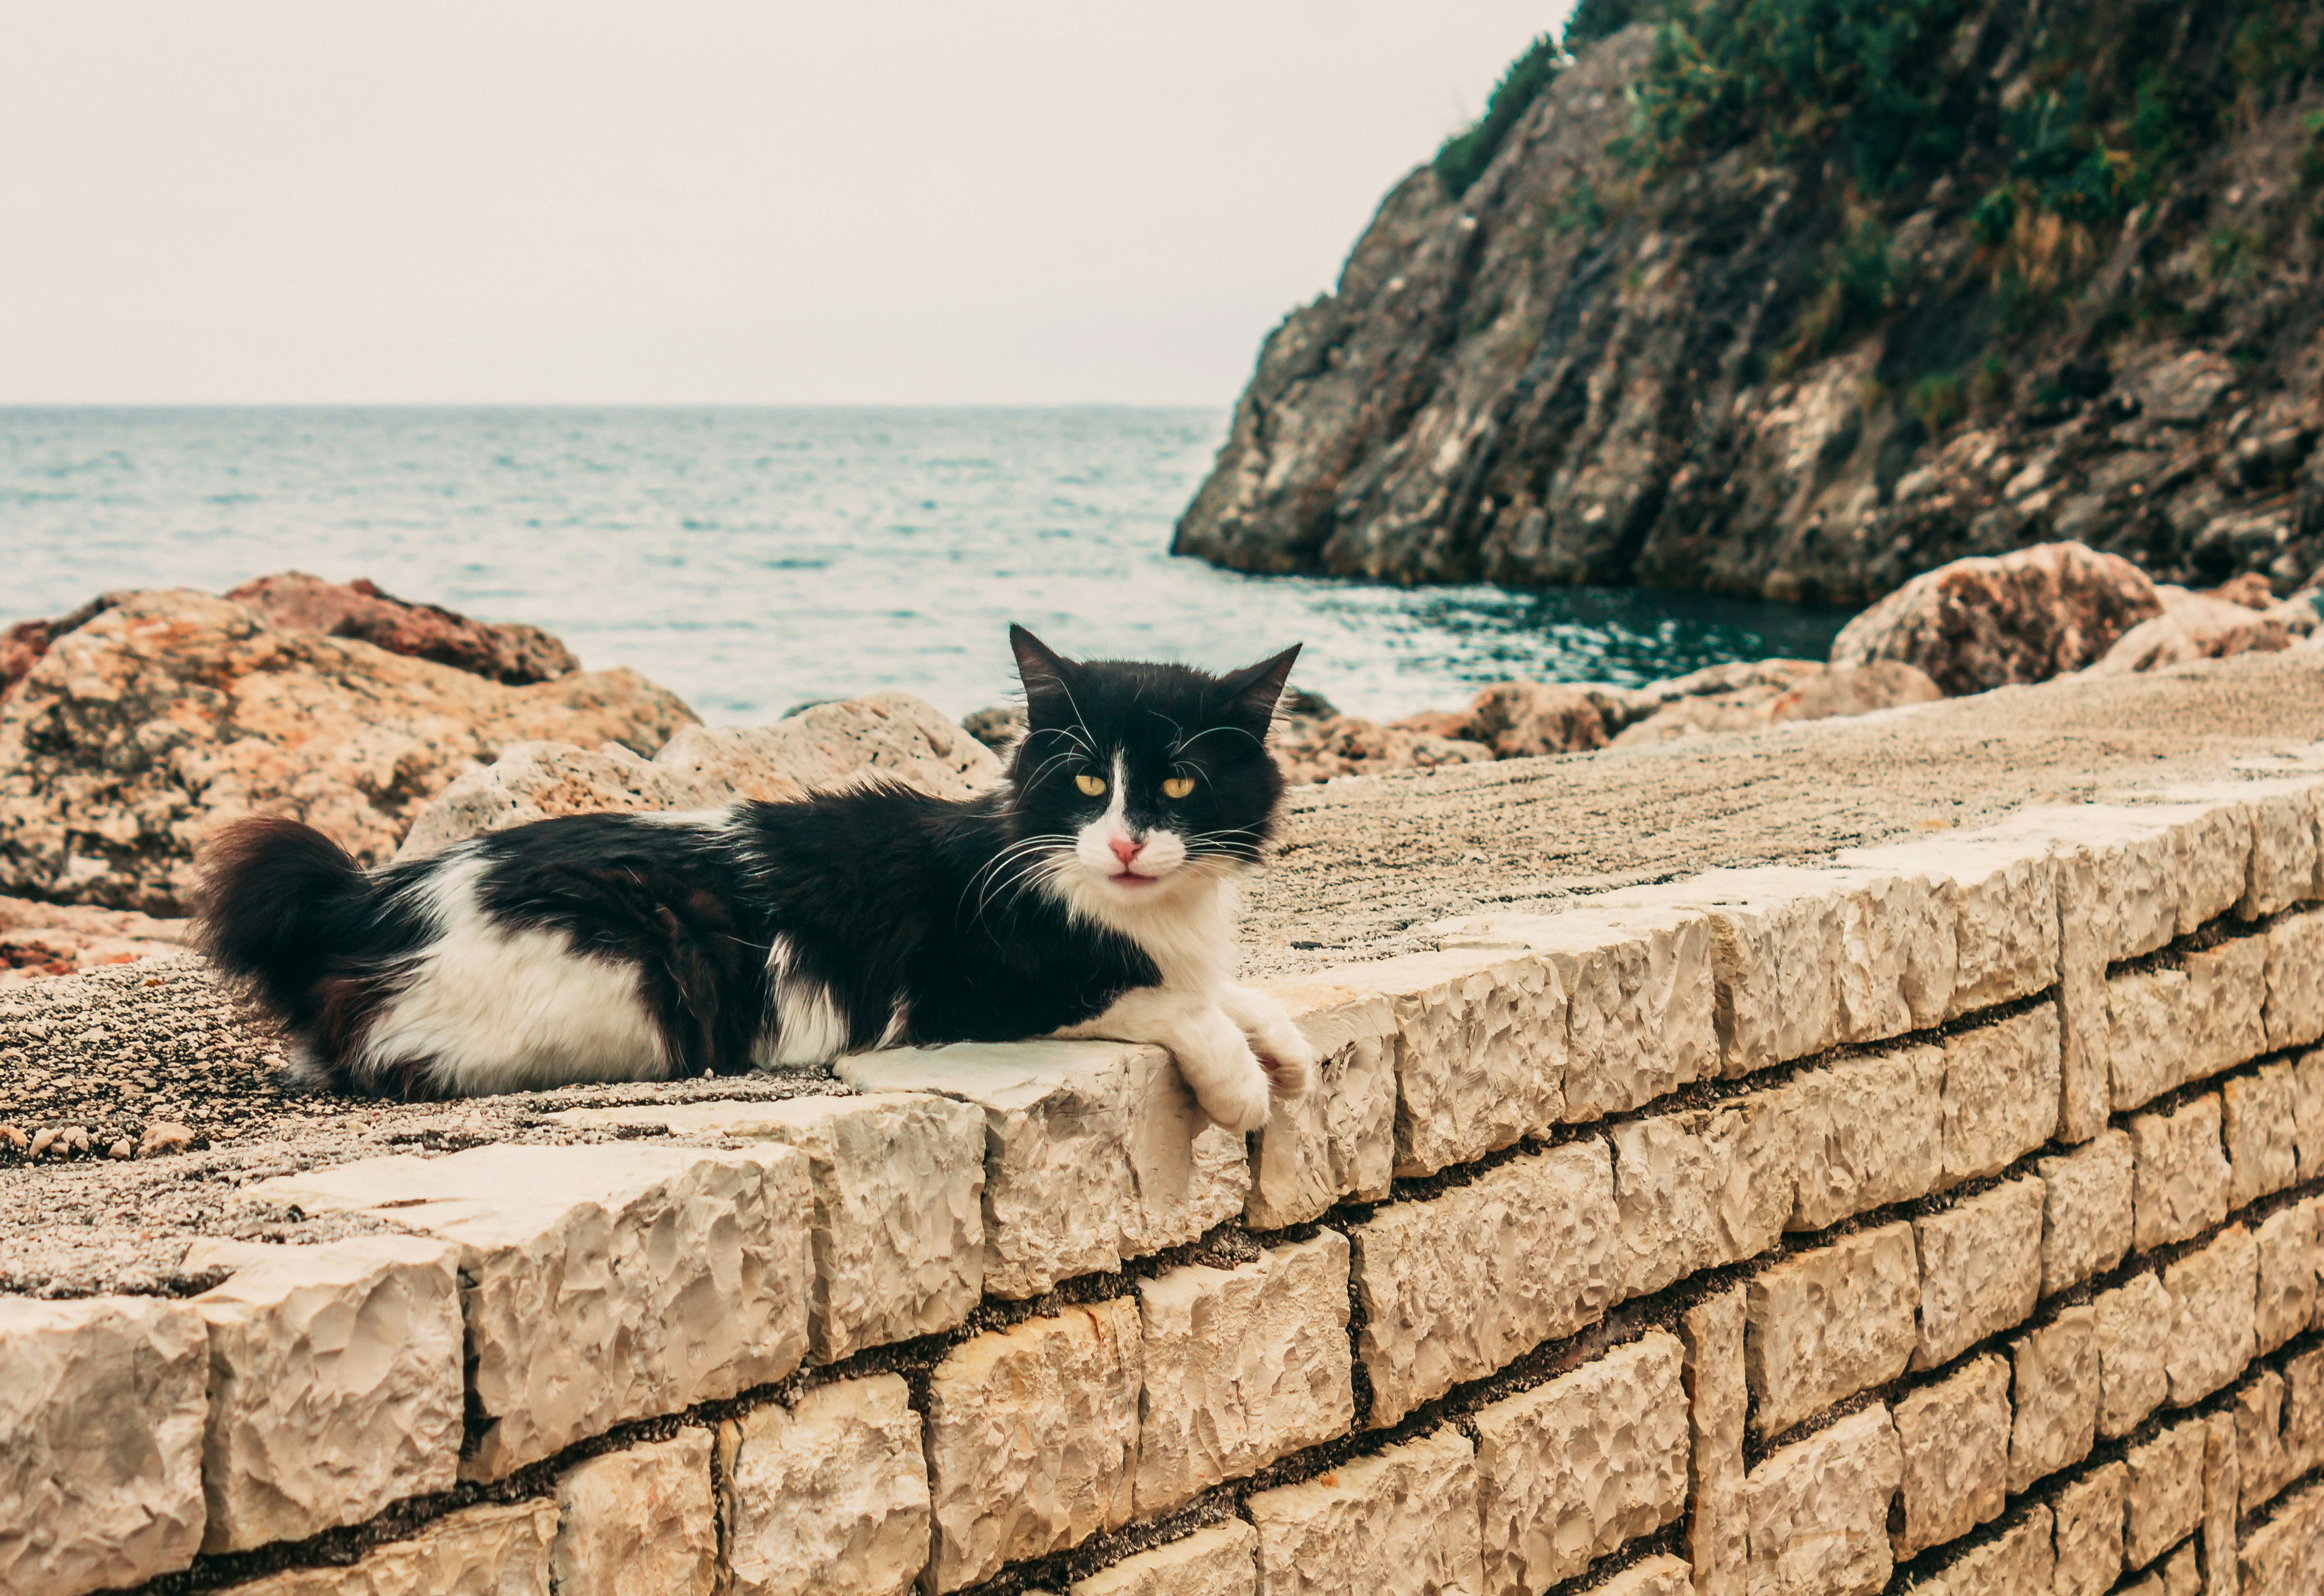 tuxedo cat on concrete wall near sea during daytime